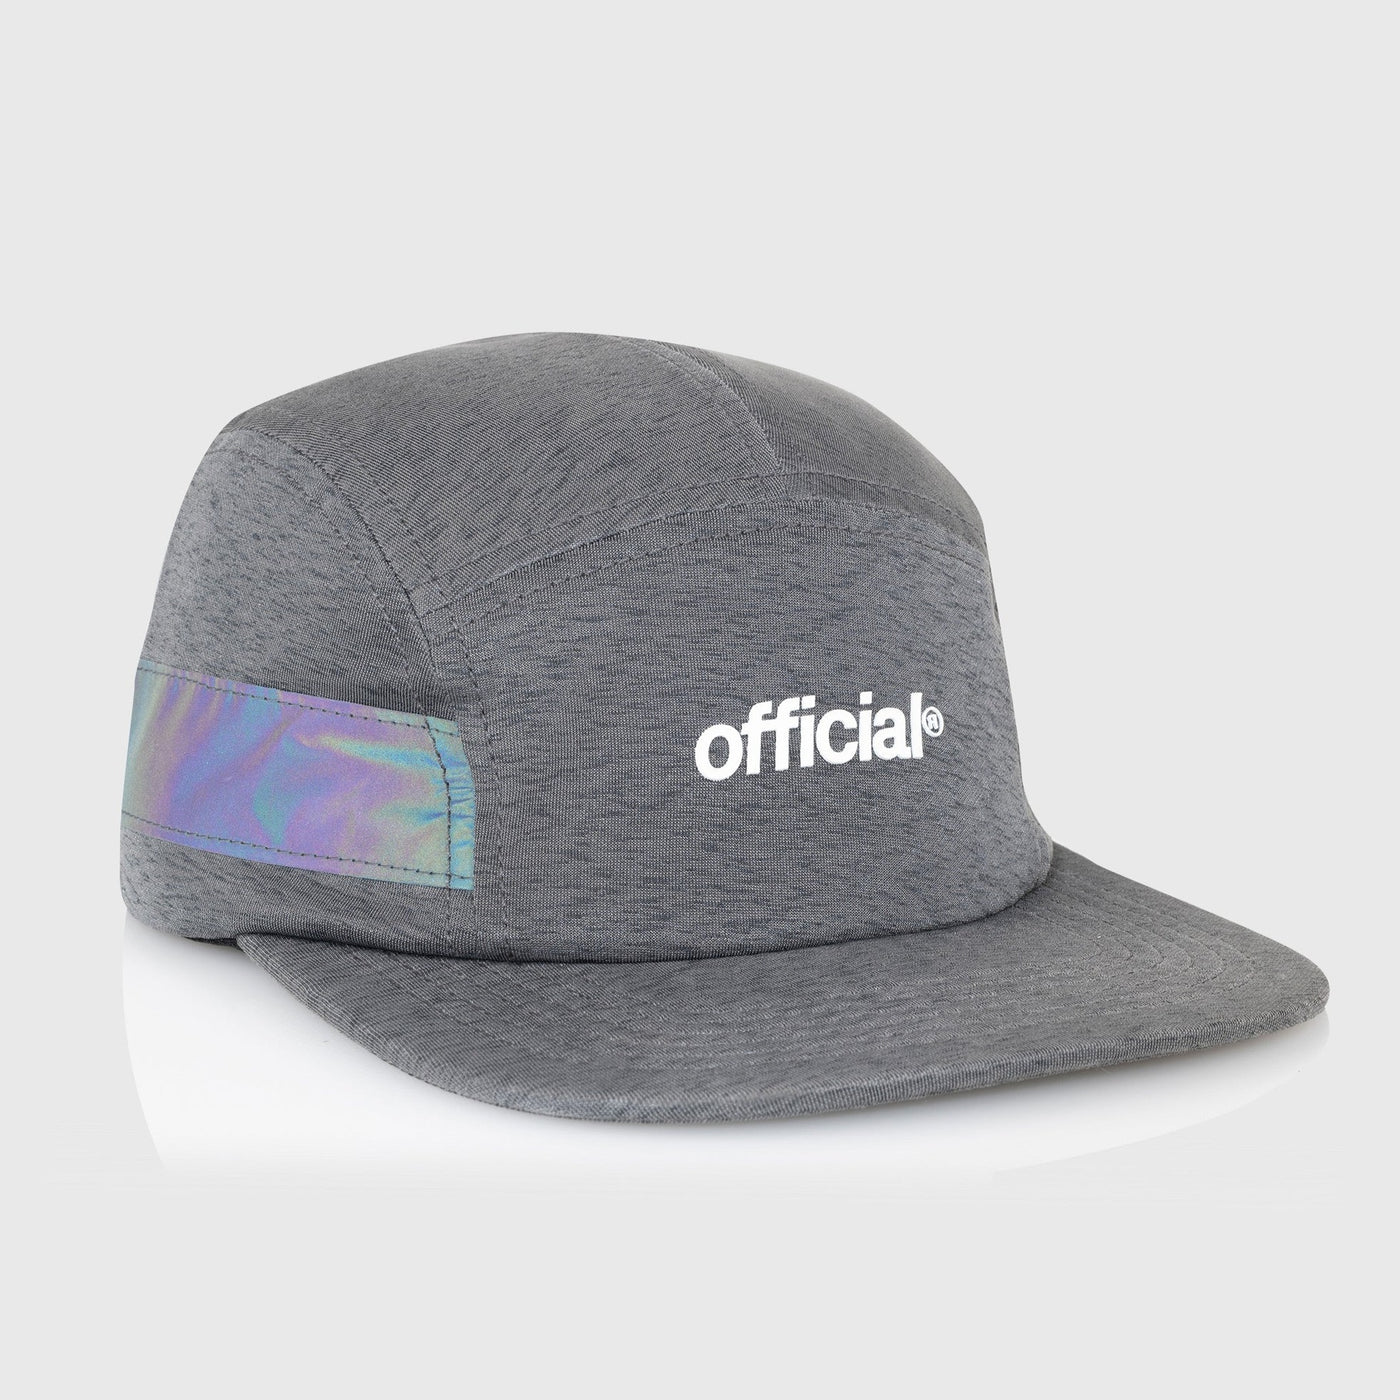 OFFICIAL TECH MISSION 5 PANEL CAMPER HAT GREY